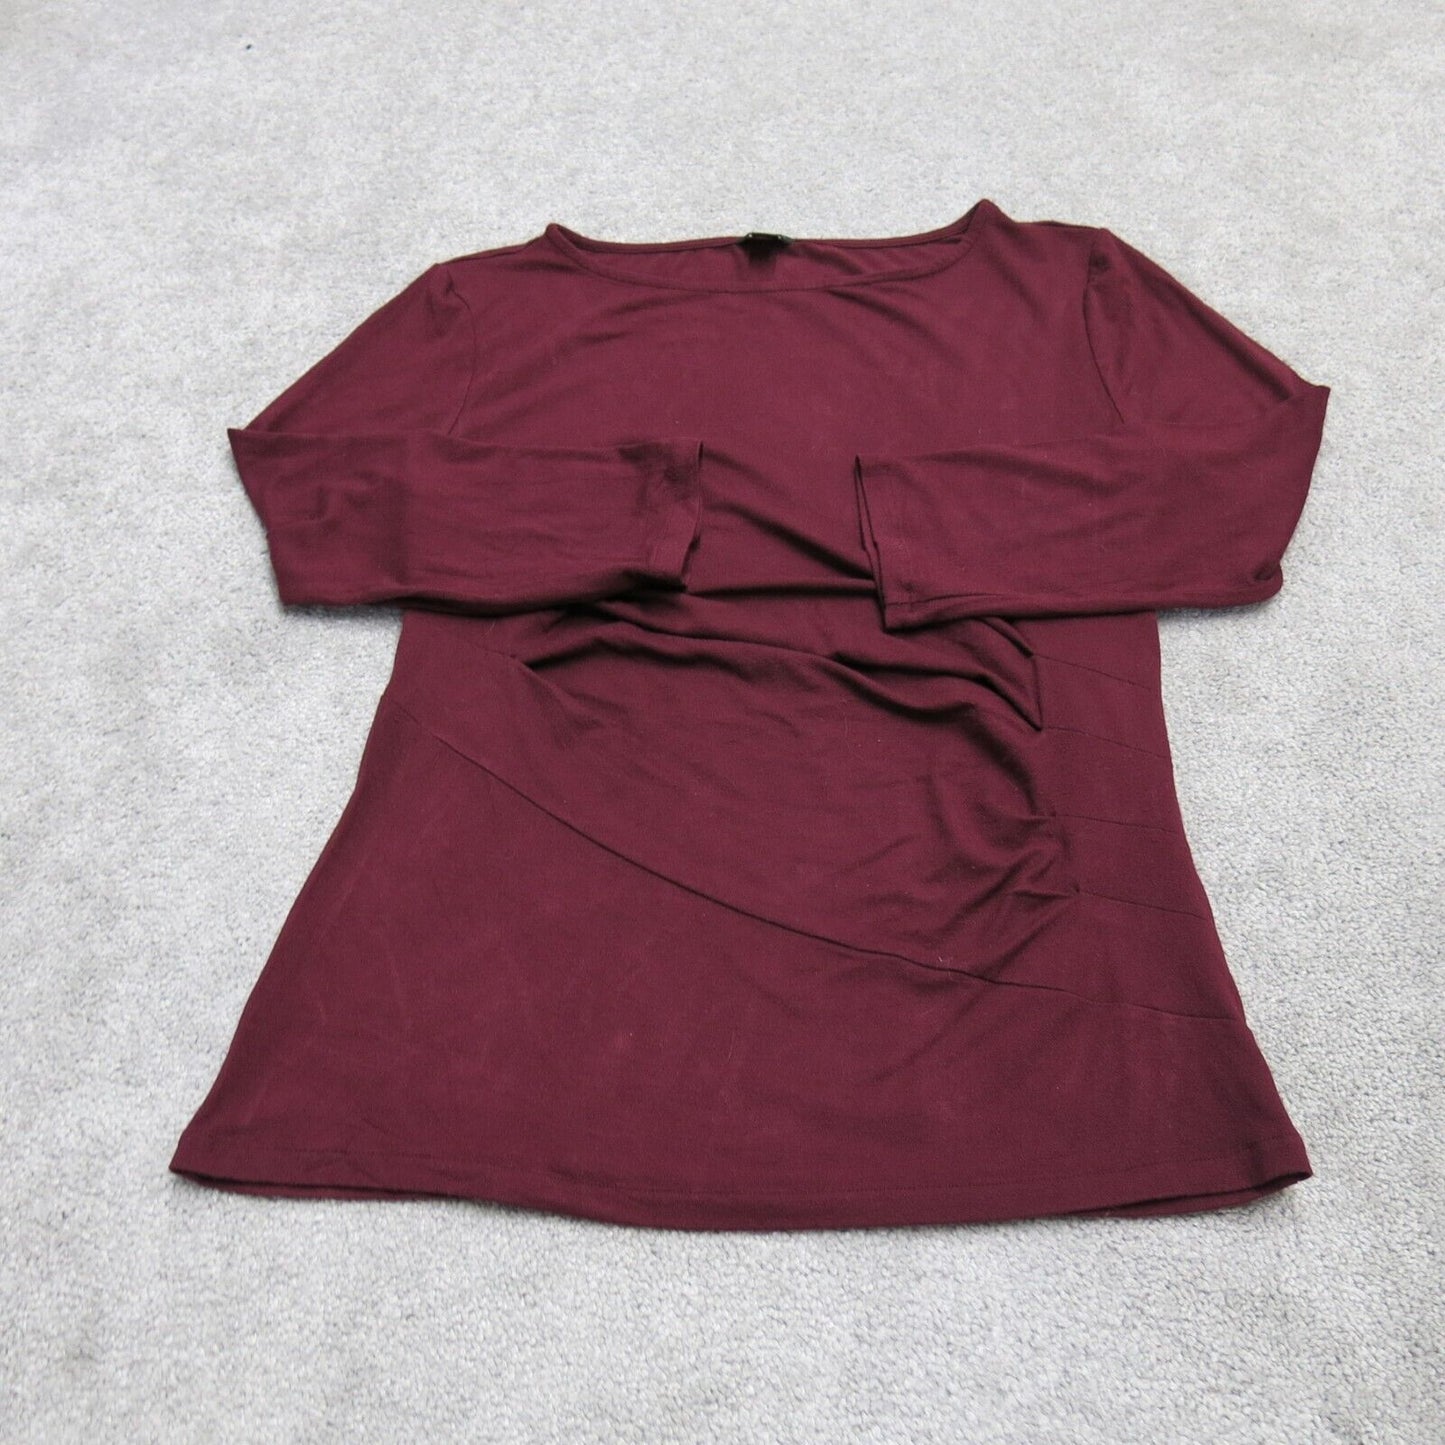 ANN Taylor Womens Blouse Top Boat Neck Long Sleeve Ruched Solid Red Size Medium